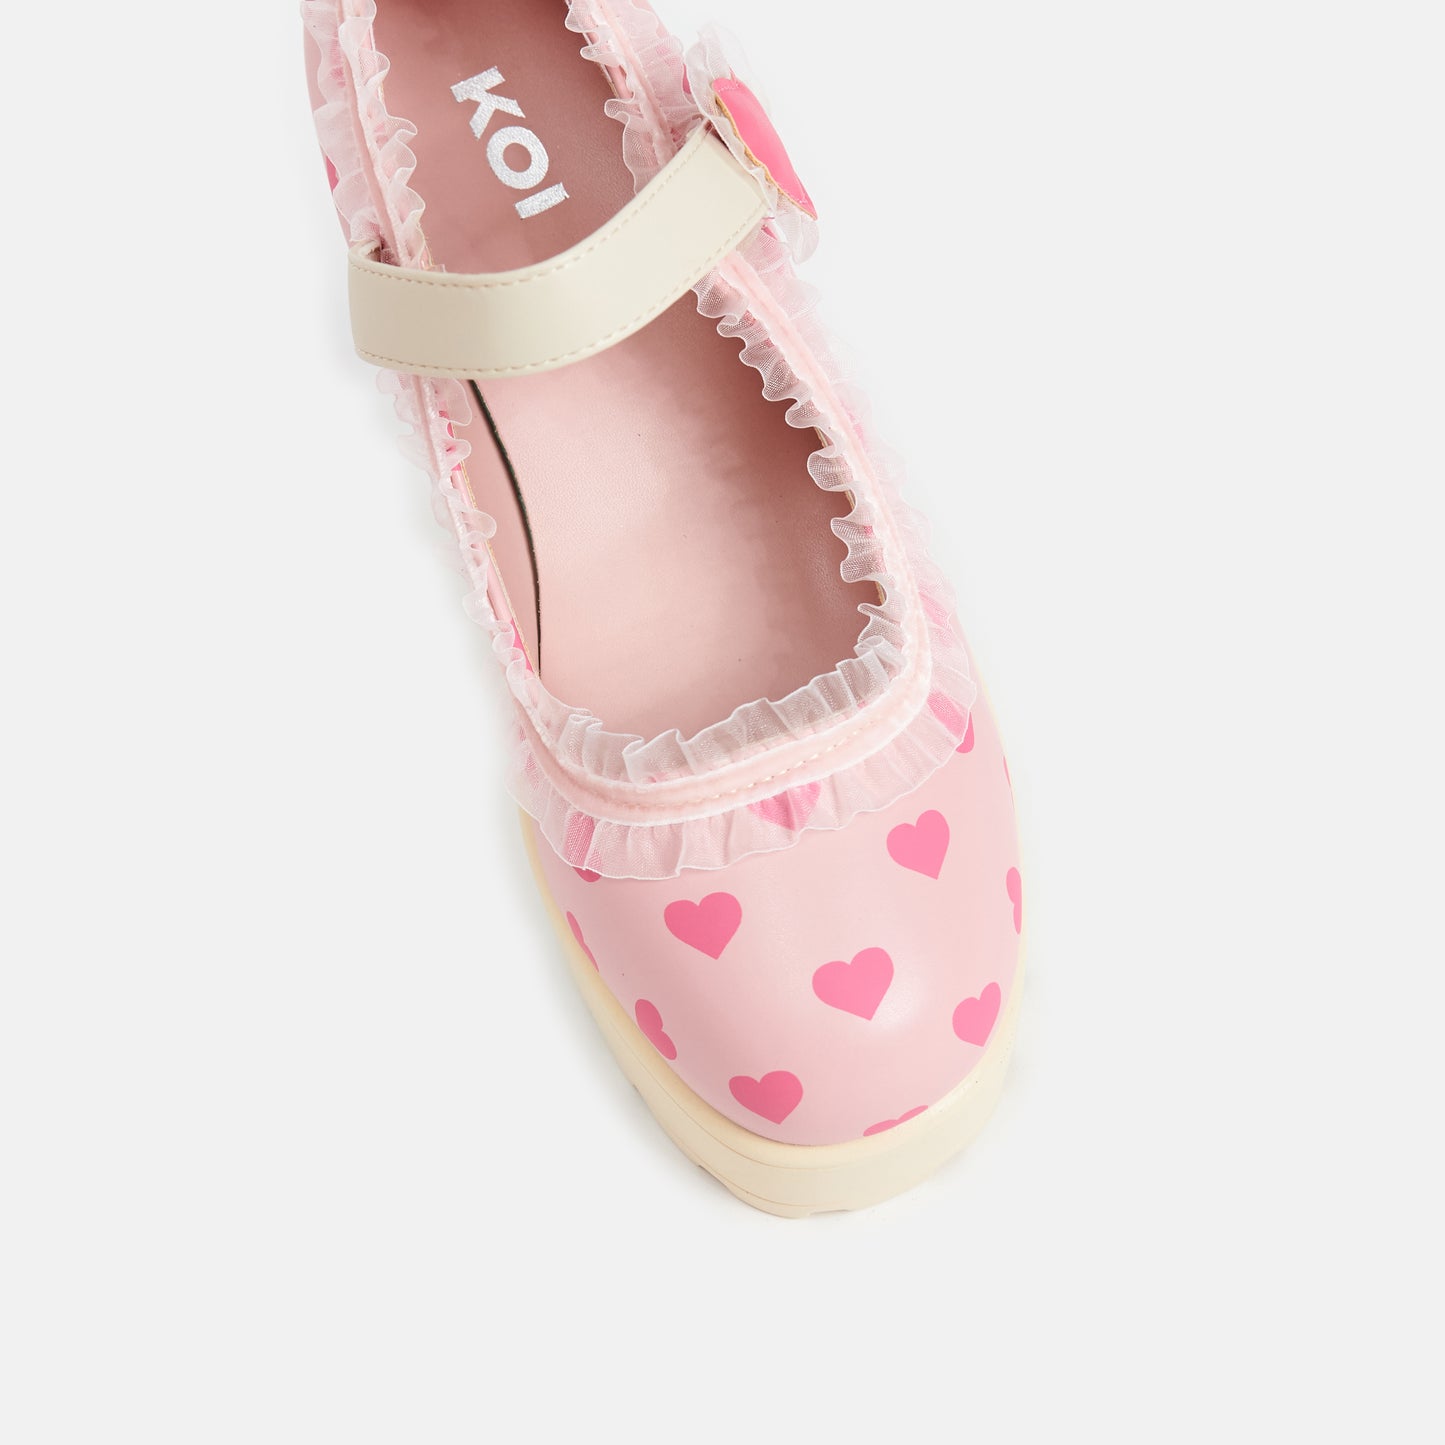 Tira Mary Jane Shoes 'Melanie Sweetheart Edition' - Mary Janes - KOI Footwear - Beige - Front Detail